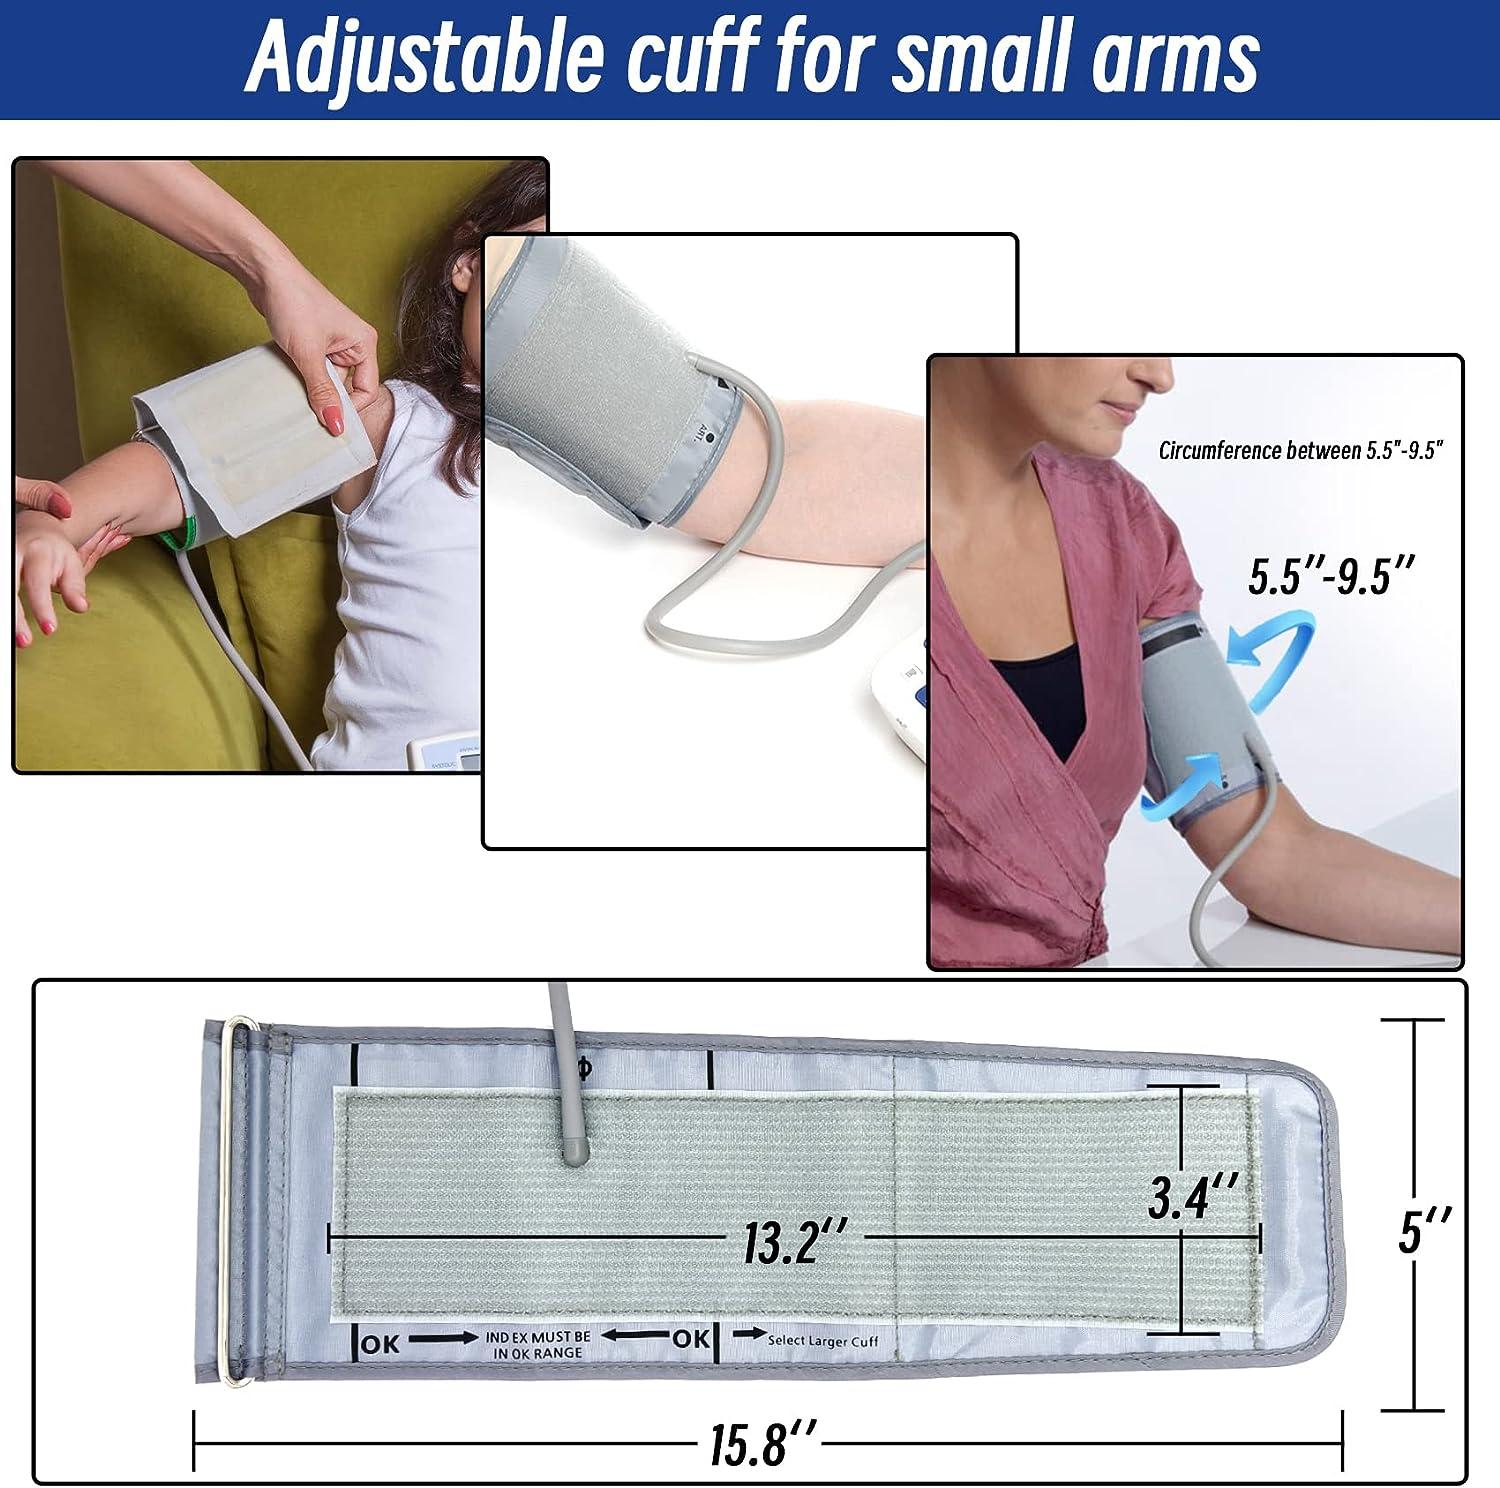 Is Your Blood Pressure Cuff Too Small? Here's How to Tell (+ Arm